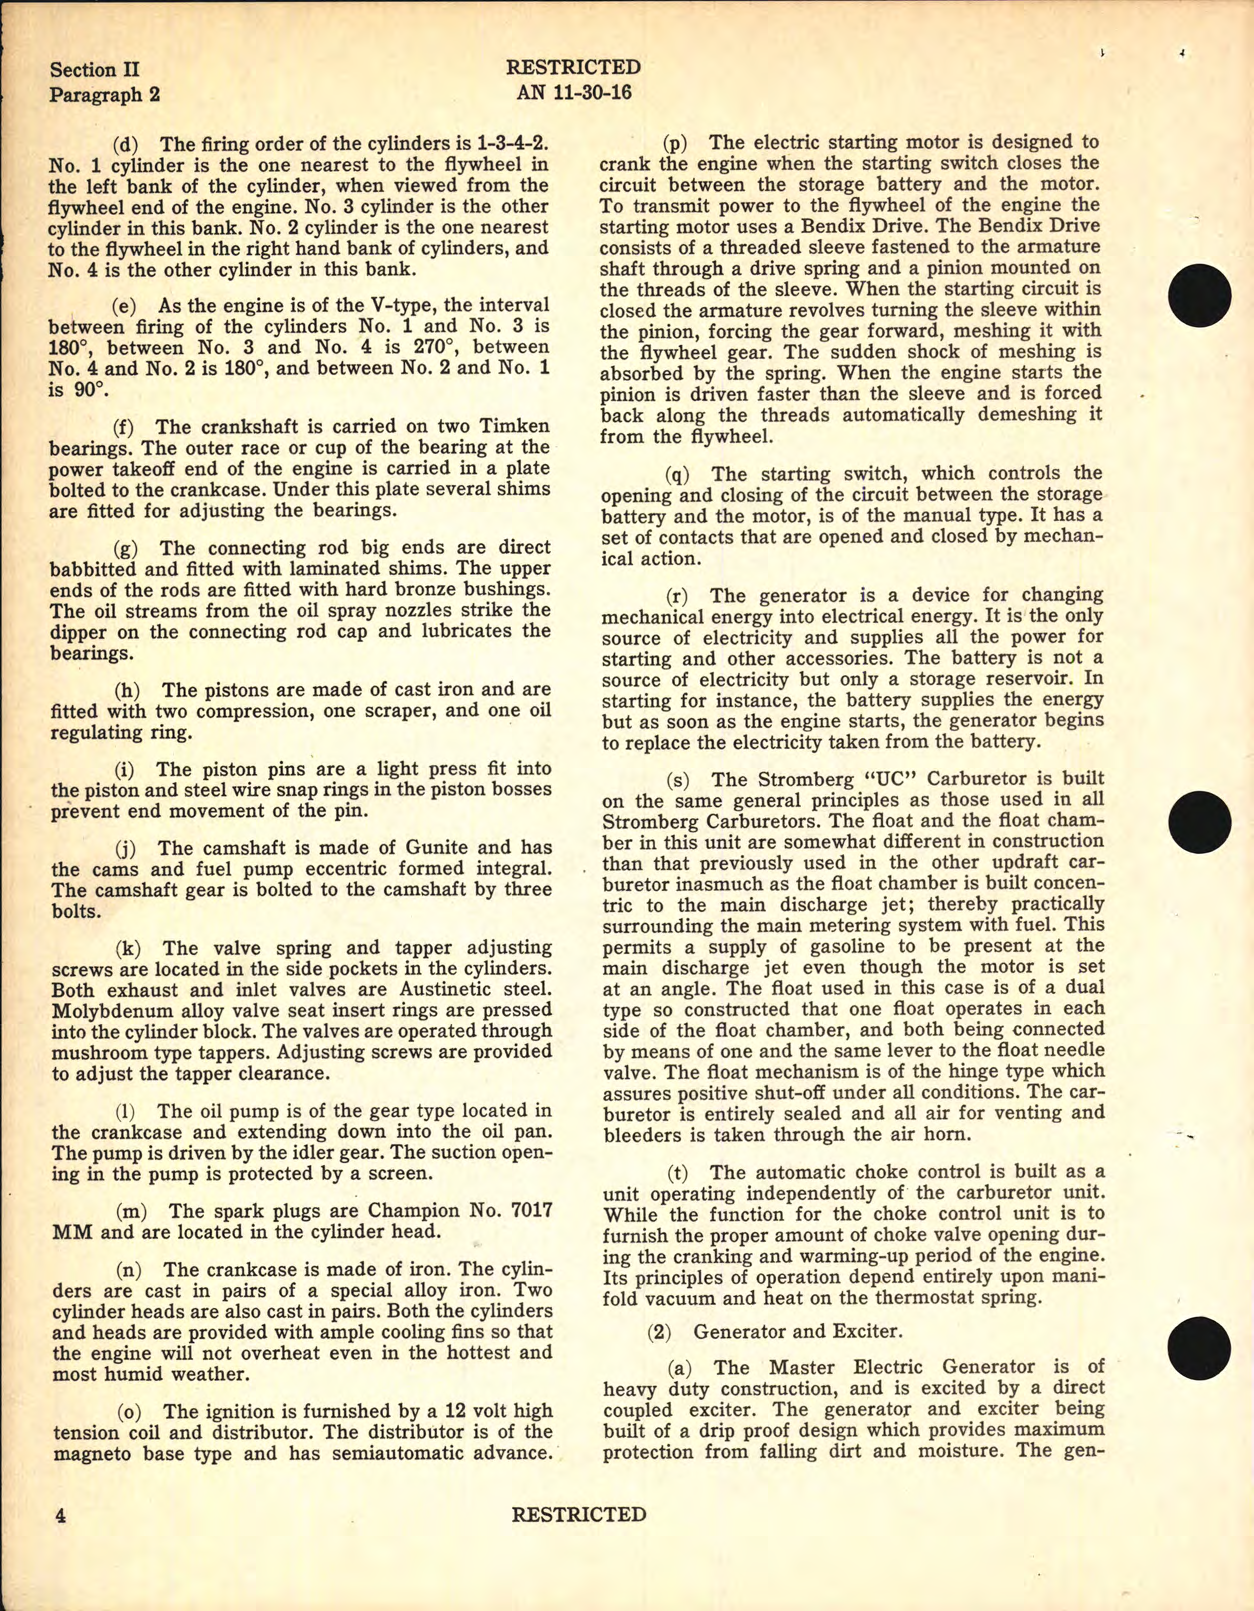 Sample page 8 from AirCorps Library document: Handbook of Instructions with Parts Catalog for Field Bombsight Repair Shop Box